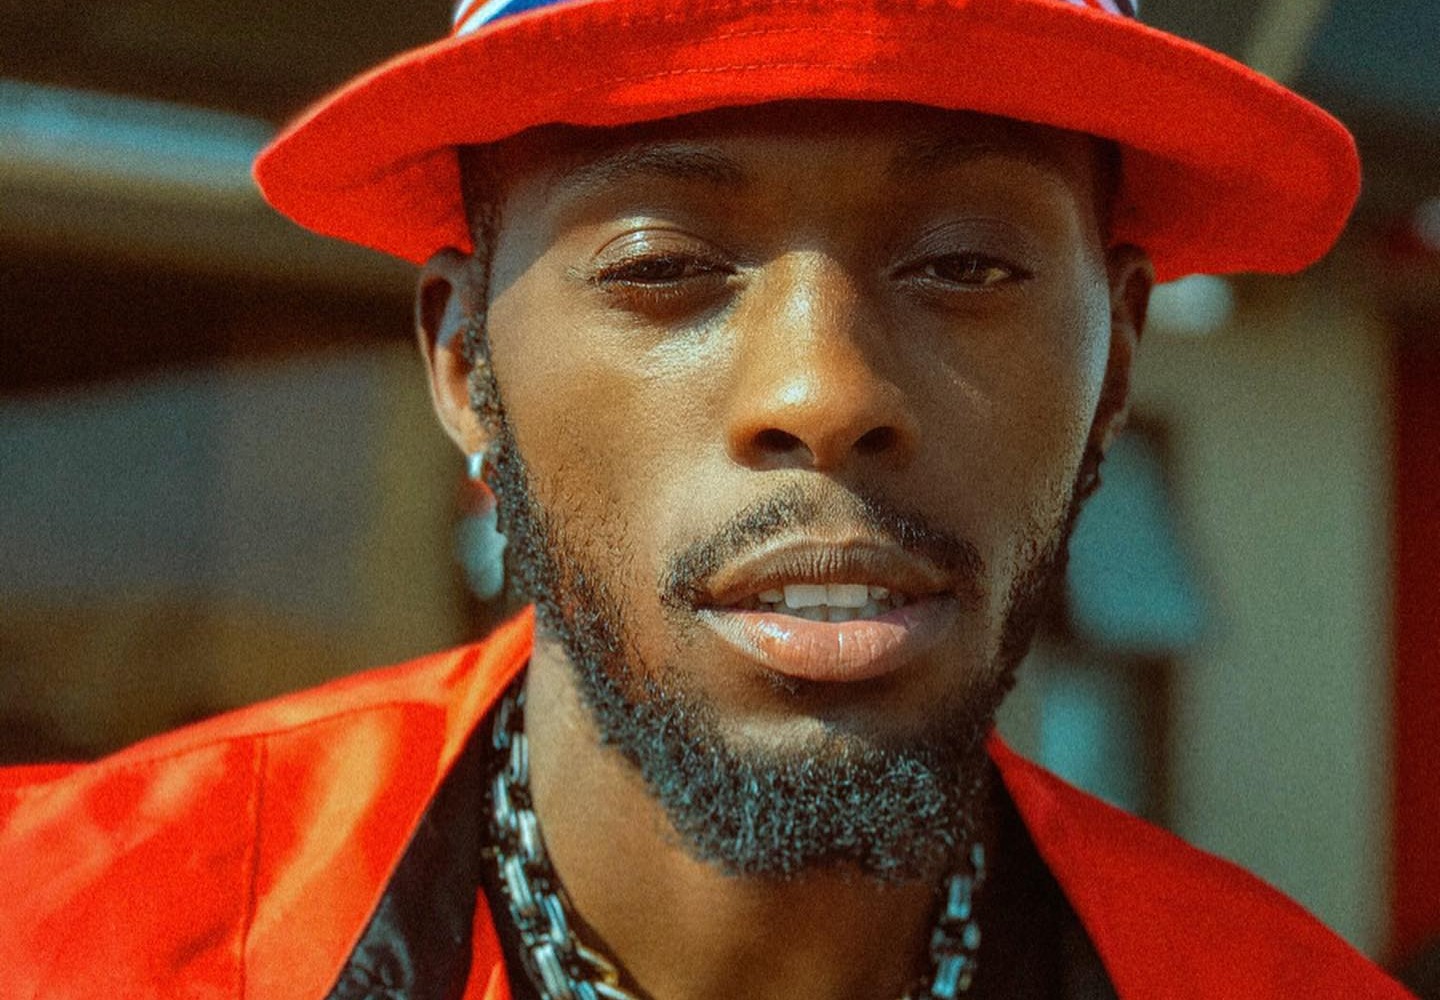 Rapper Takura's Unflinching Look at Mental Health and Drug Abuse - From Despair to Hope!